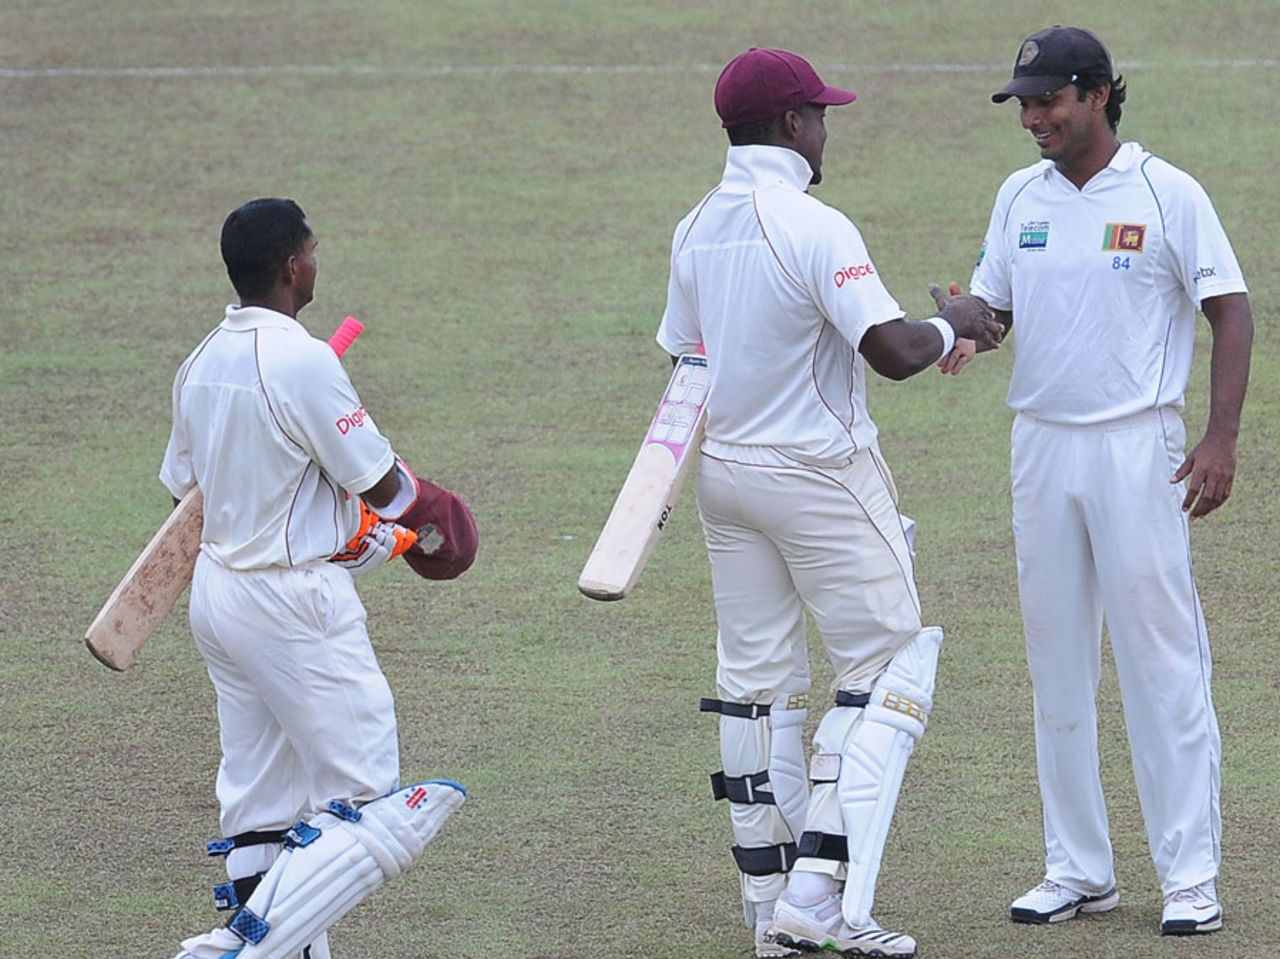 Play was called off due to fading light with 11 overs remaining, Sri Lanka v West Indies, 2nd Test, Premadasa Stadium, Colombo, 5th day, November 27, 2010